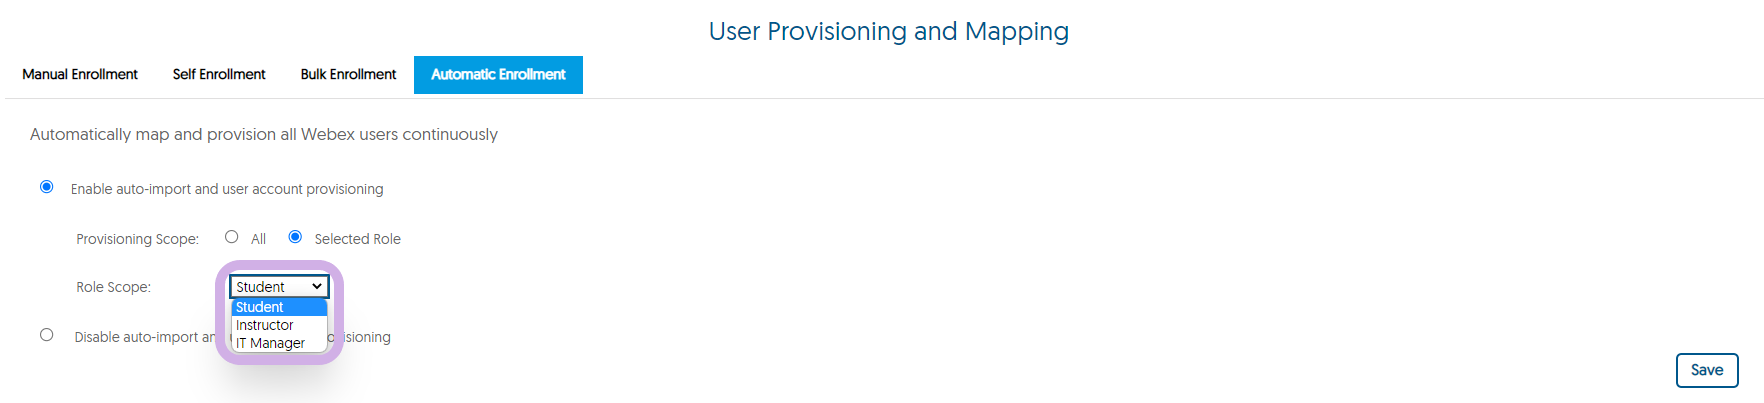 The User Provisioning and Mapping panel for Webex with Role Scope set to Selected Role from Automatic Enrollment.